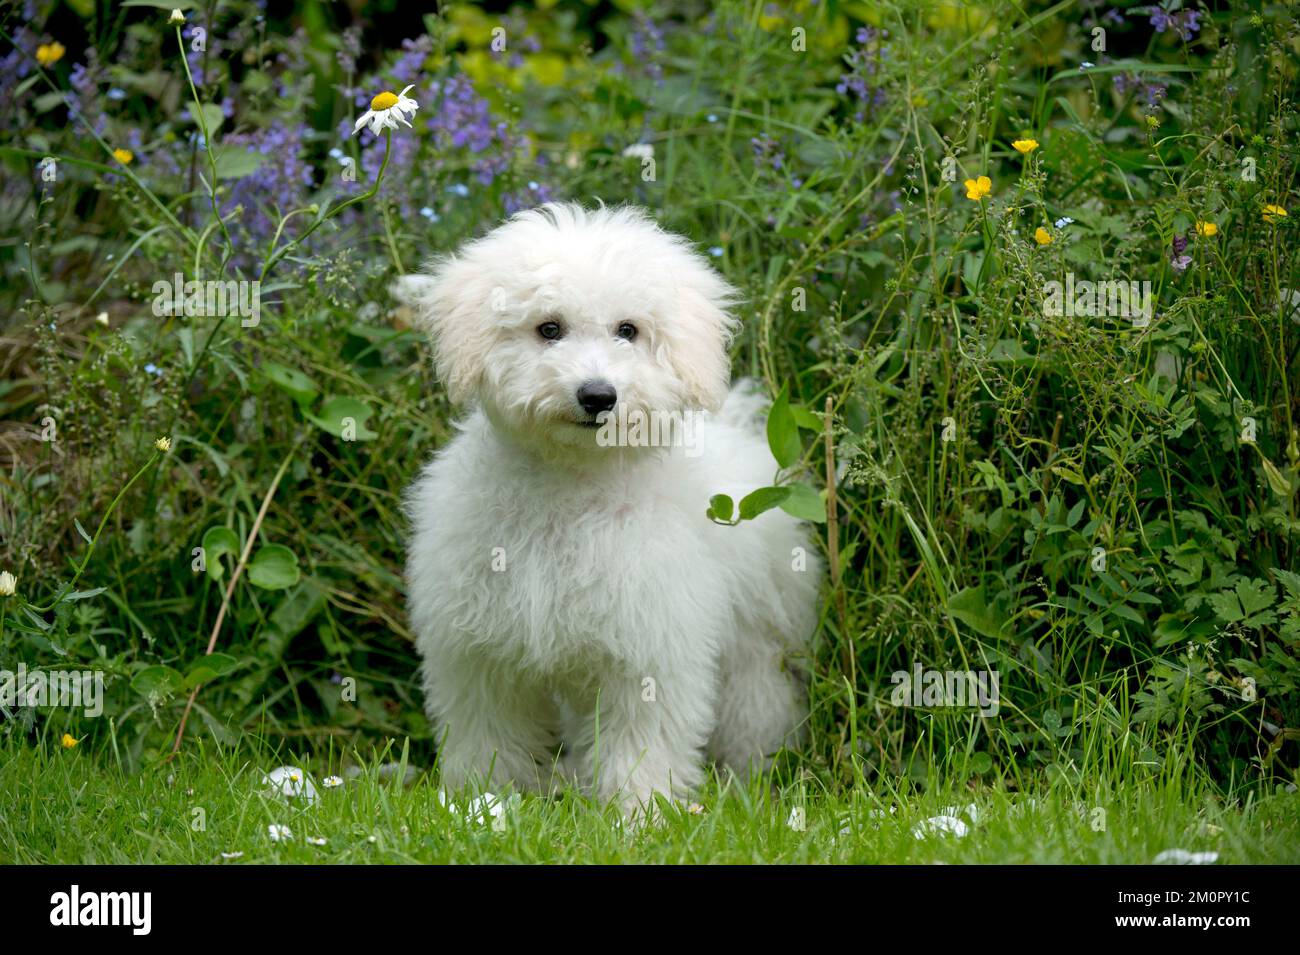 DOG - Bichon Frise X Poodle standing in garden Stock Photo